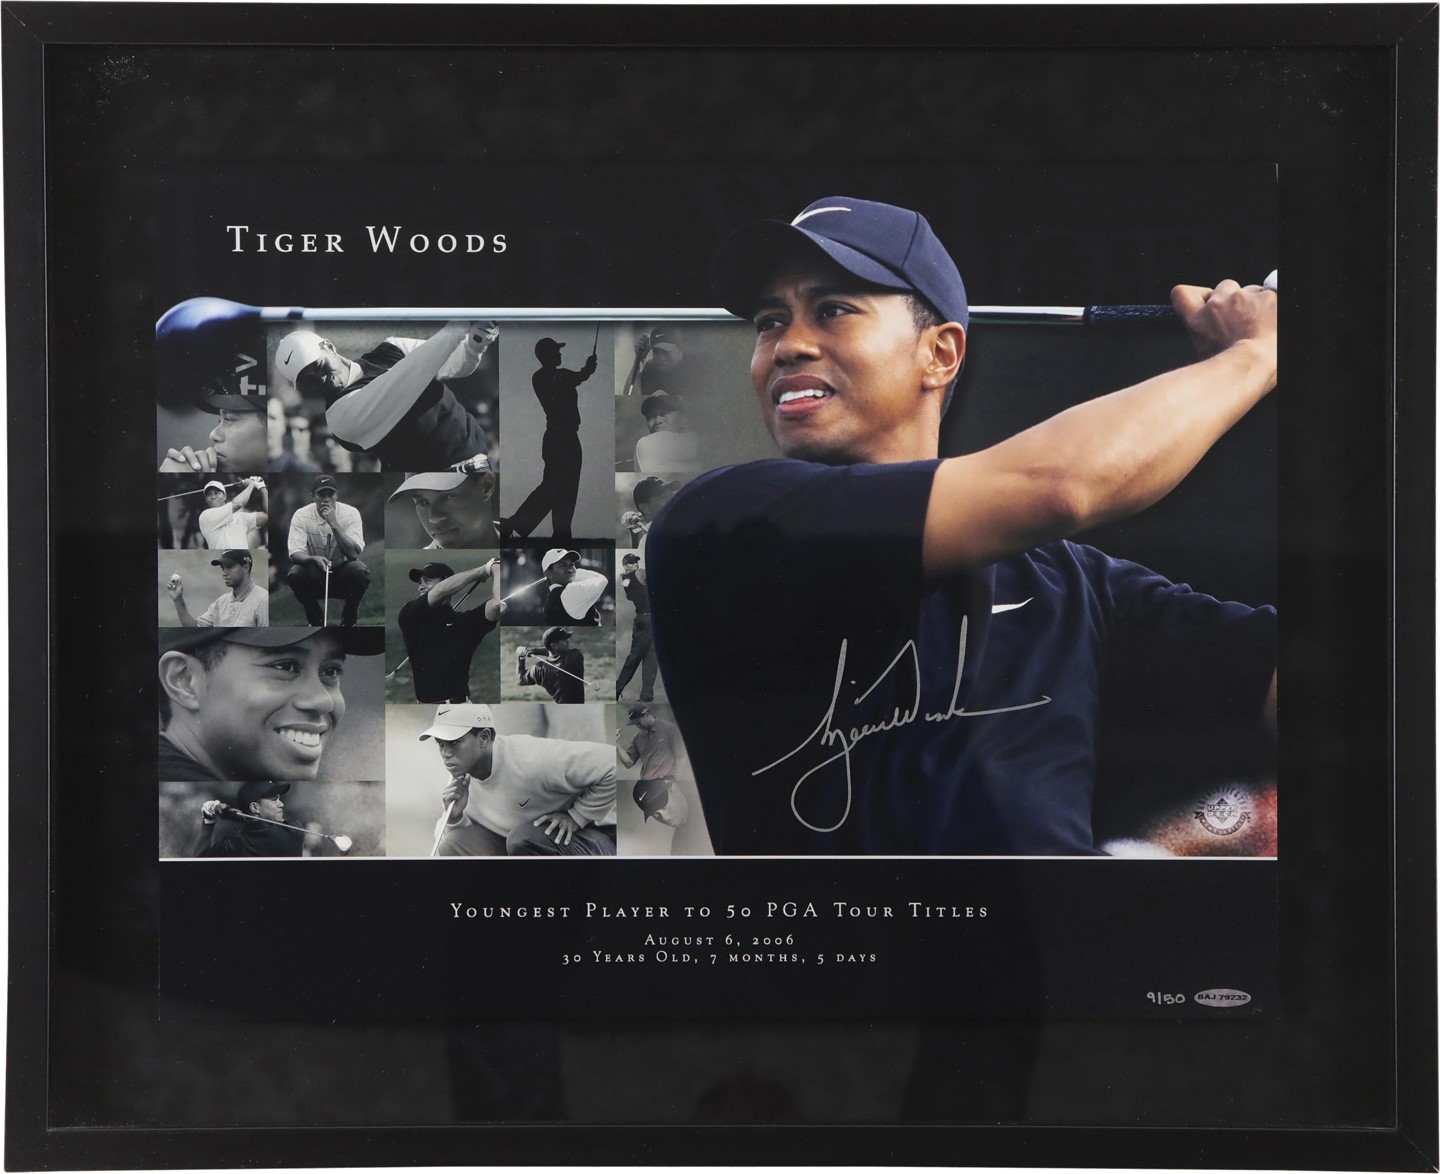 - Tiger Woods "Youngest Player to 50 PGA Tour Titles" Limited Edition Signed Photograph LE 9/50 (UDA)